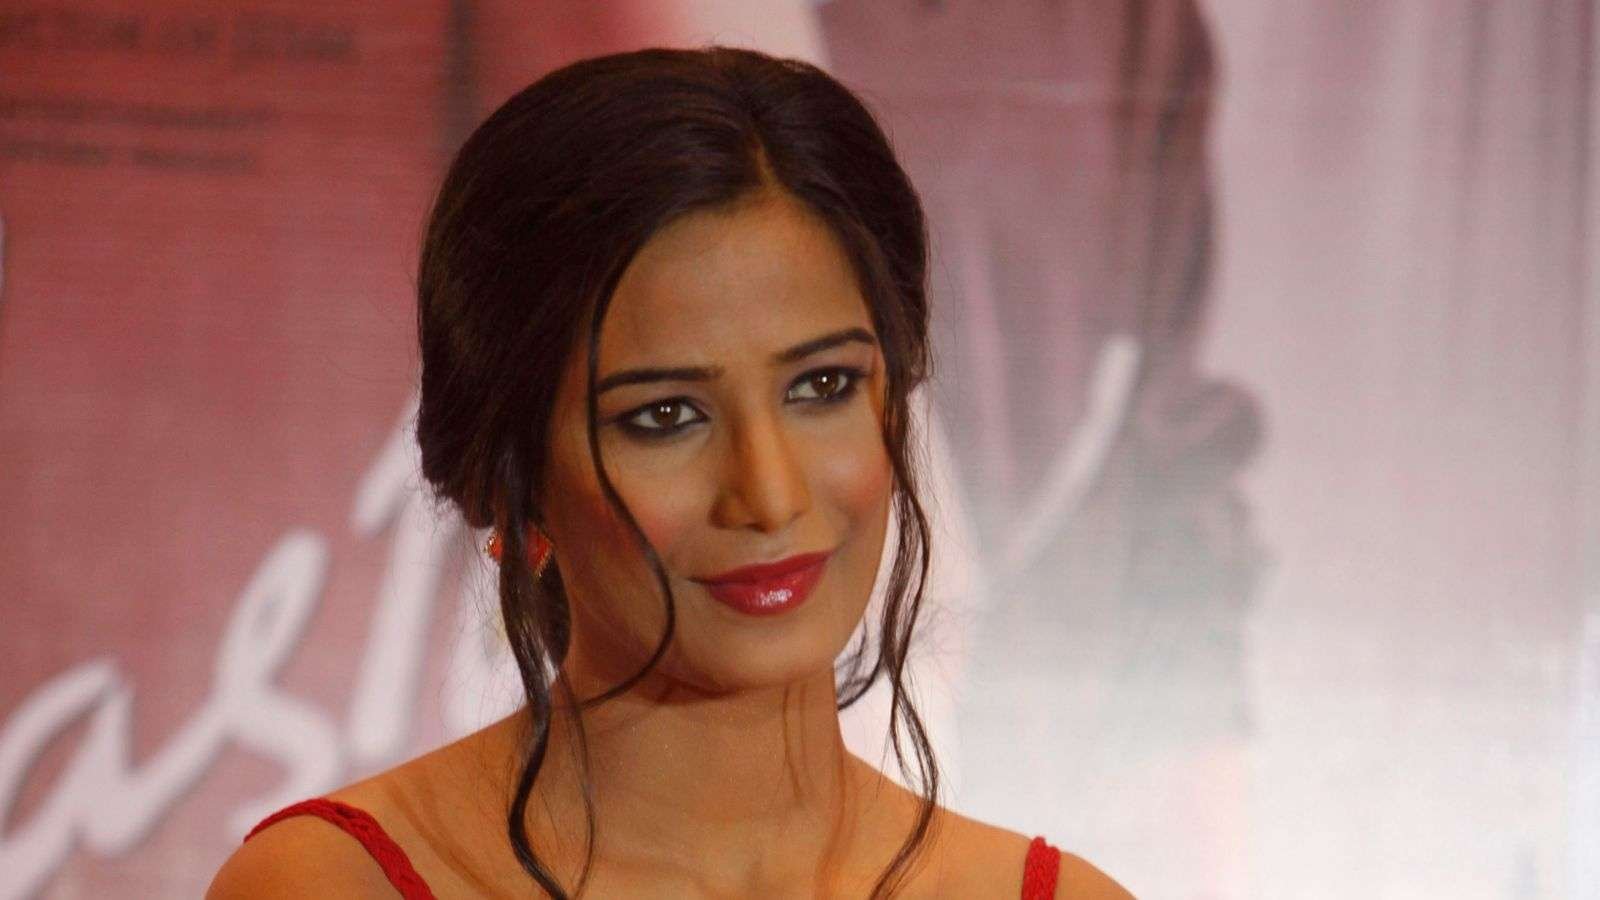 Indian Model Poonam Pandey Fakes Death to Raise Awareness of Cervical Cancer